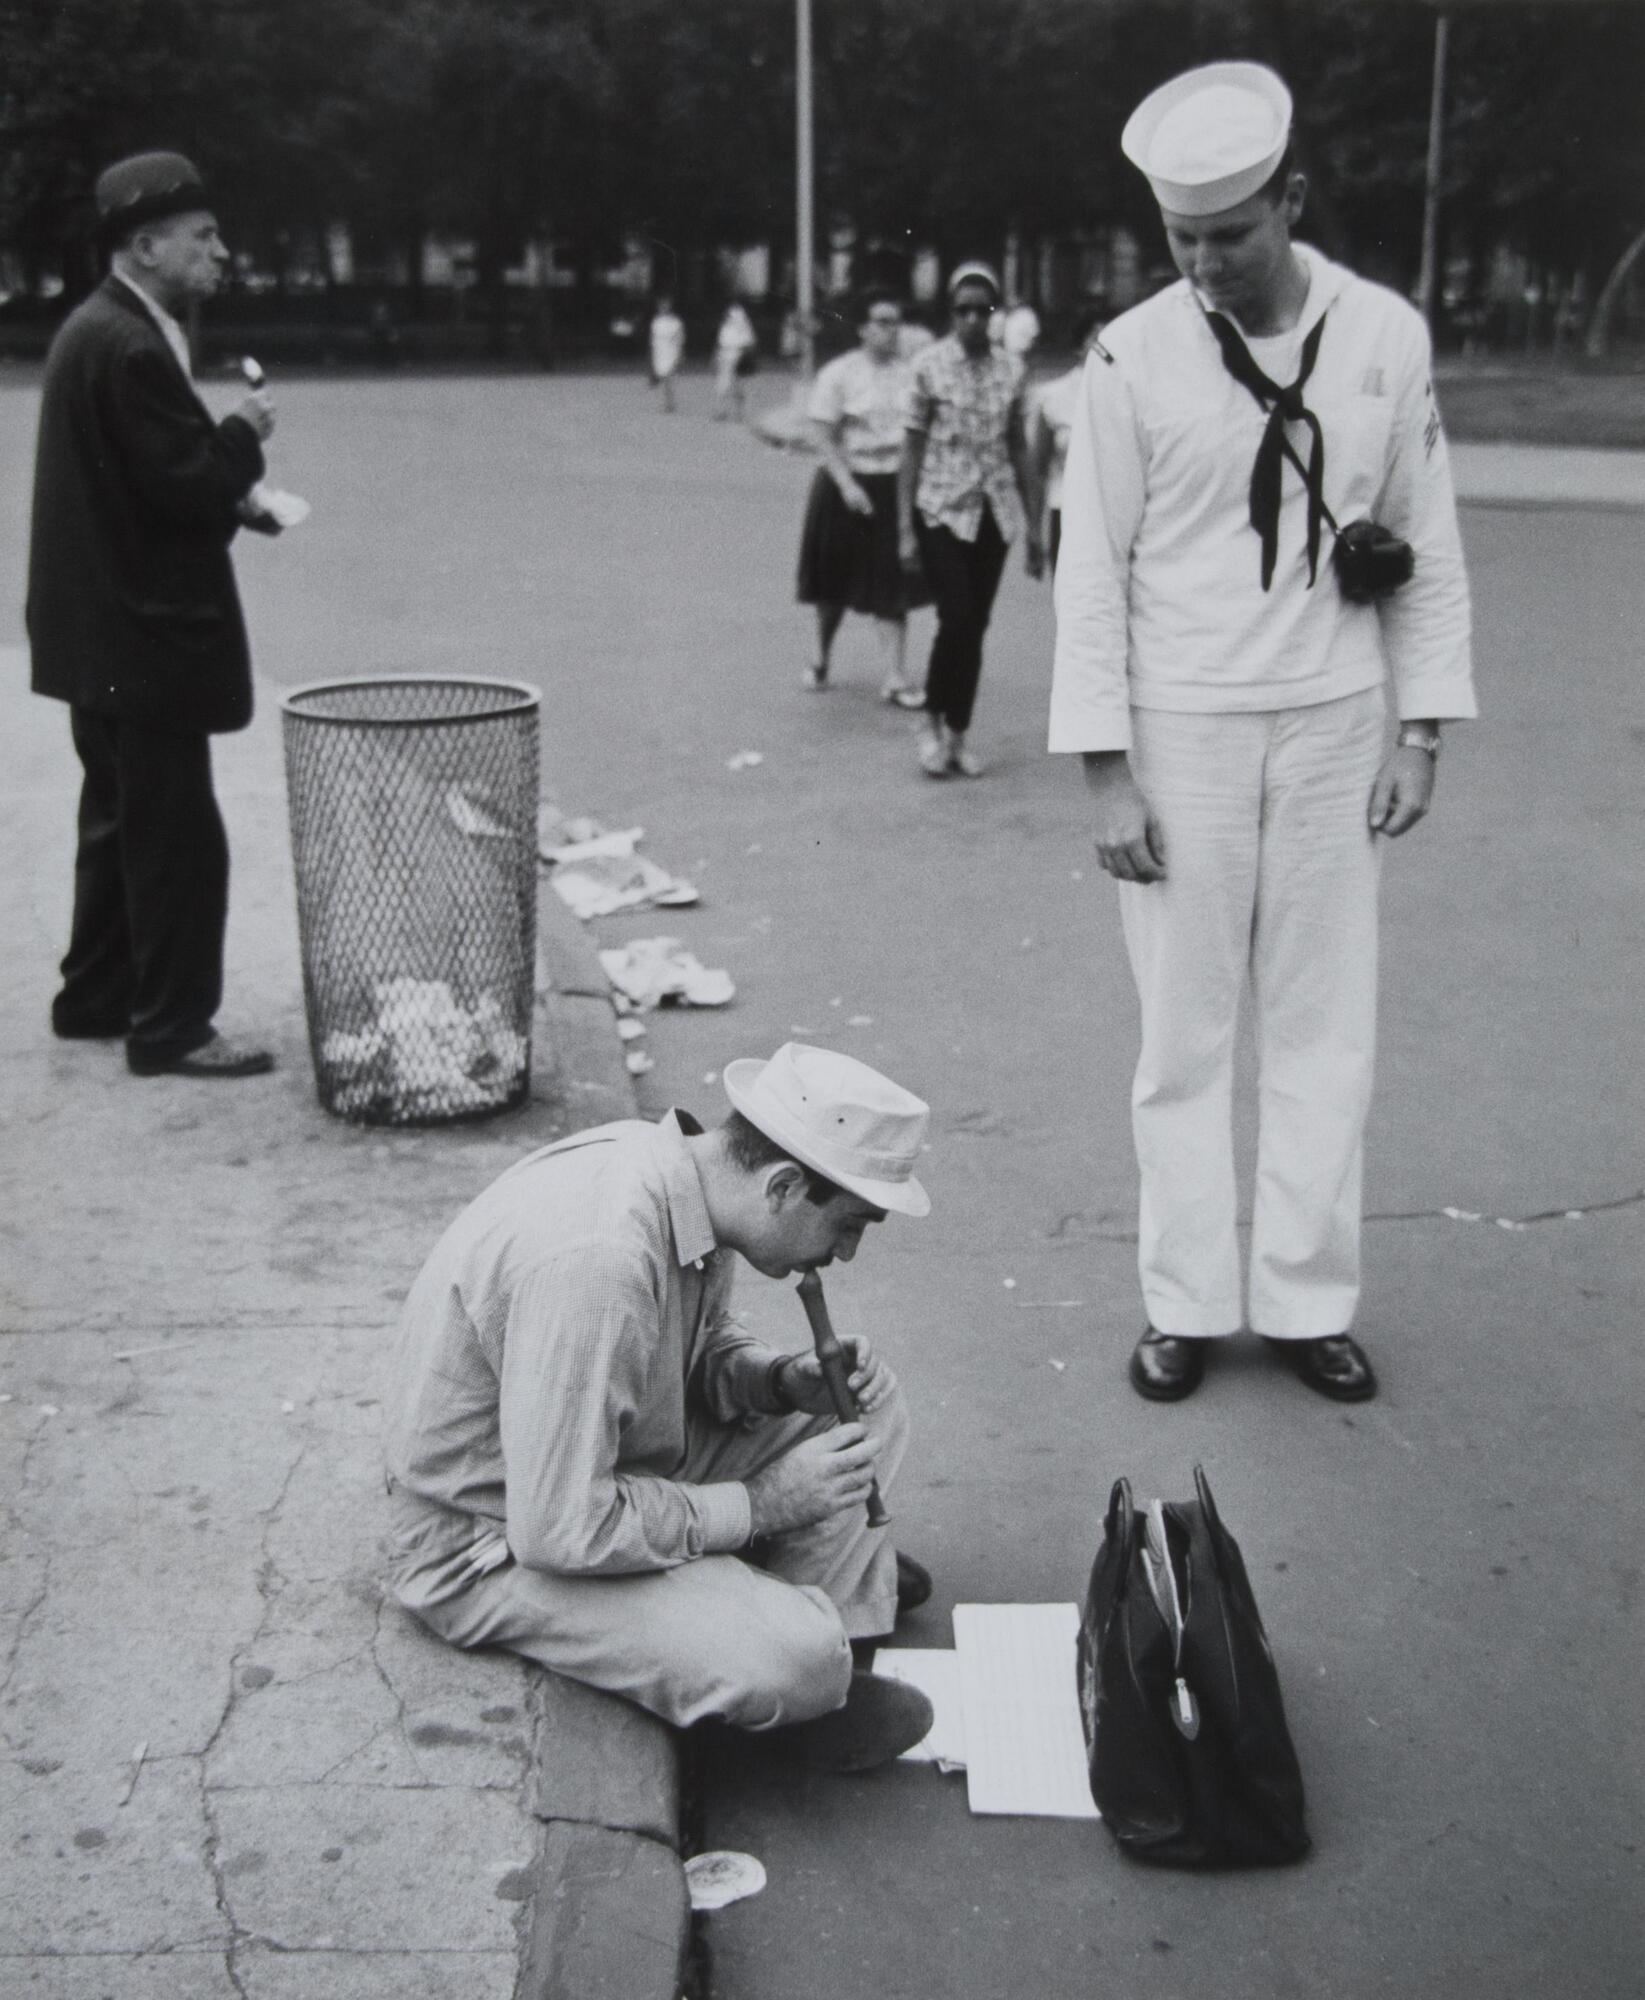 A street scene. There is a man playing the flute and a sailor standing. There is a man in a suit behind him, next to a trash can. There is litter all over the ground.